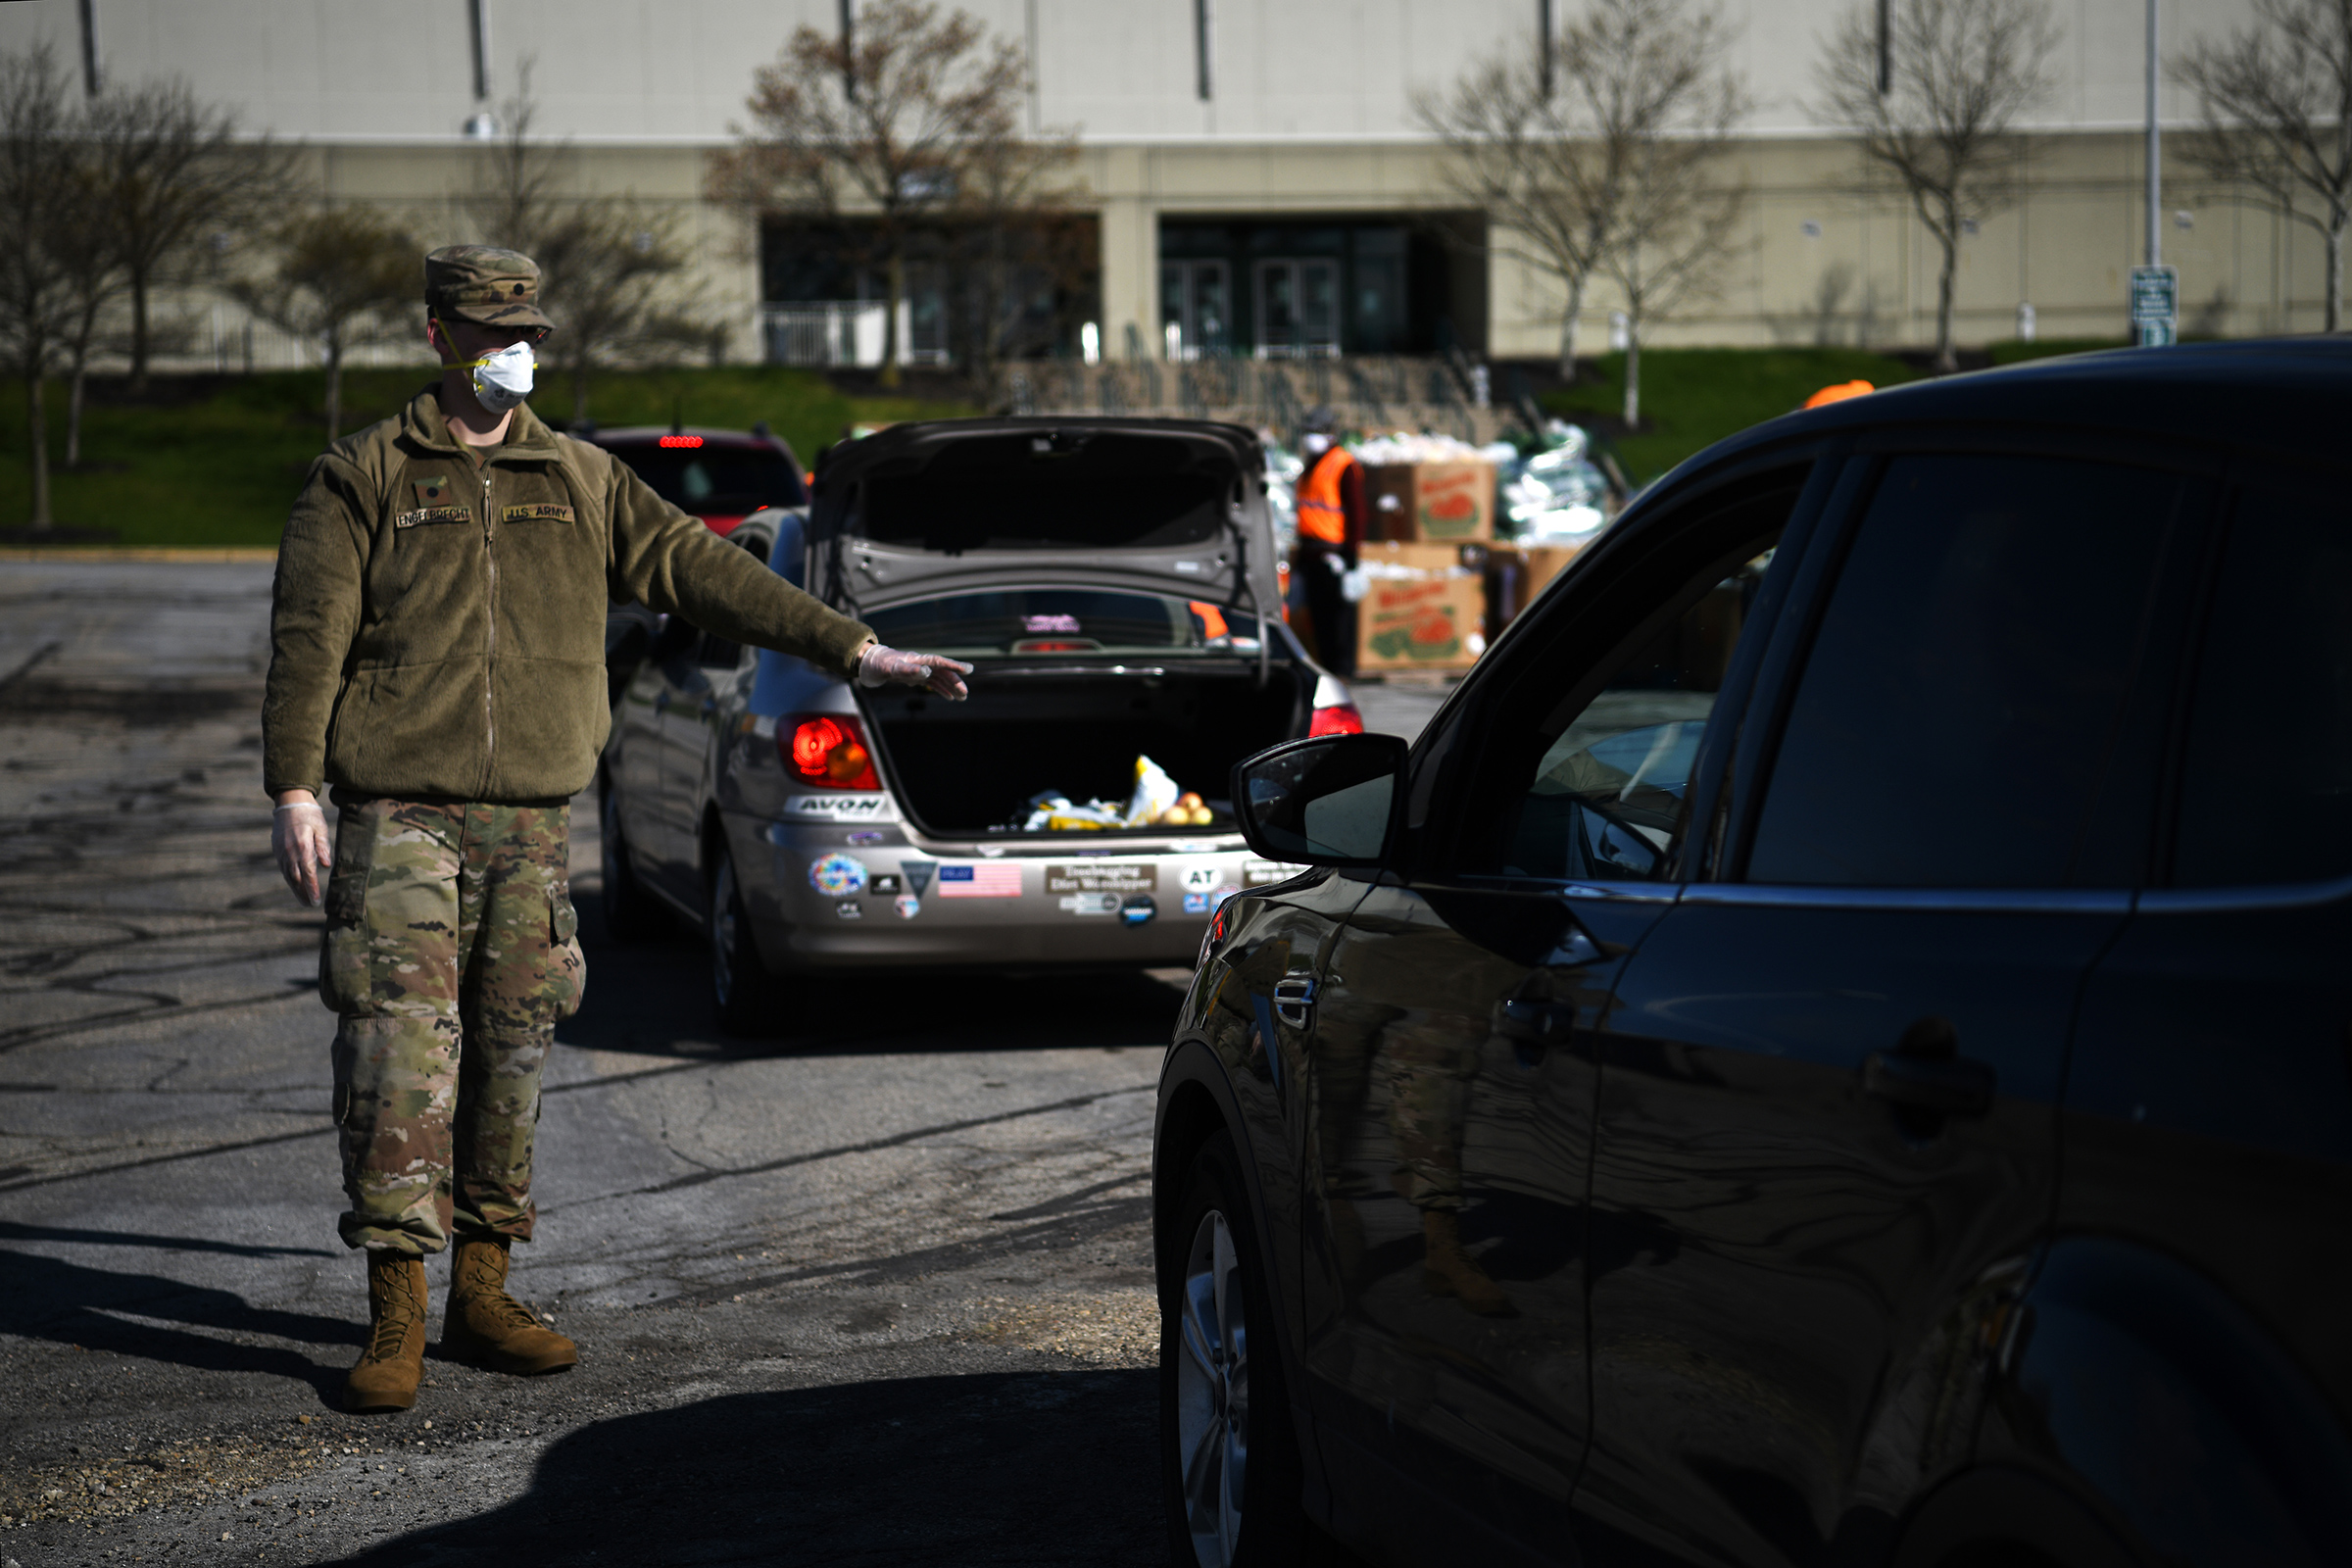 A soldier directs traffic during a drive-thru food distribution event at Wright State University's Nutter Center in Fairborn, Ohio, on April 21, 2020.